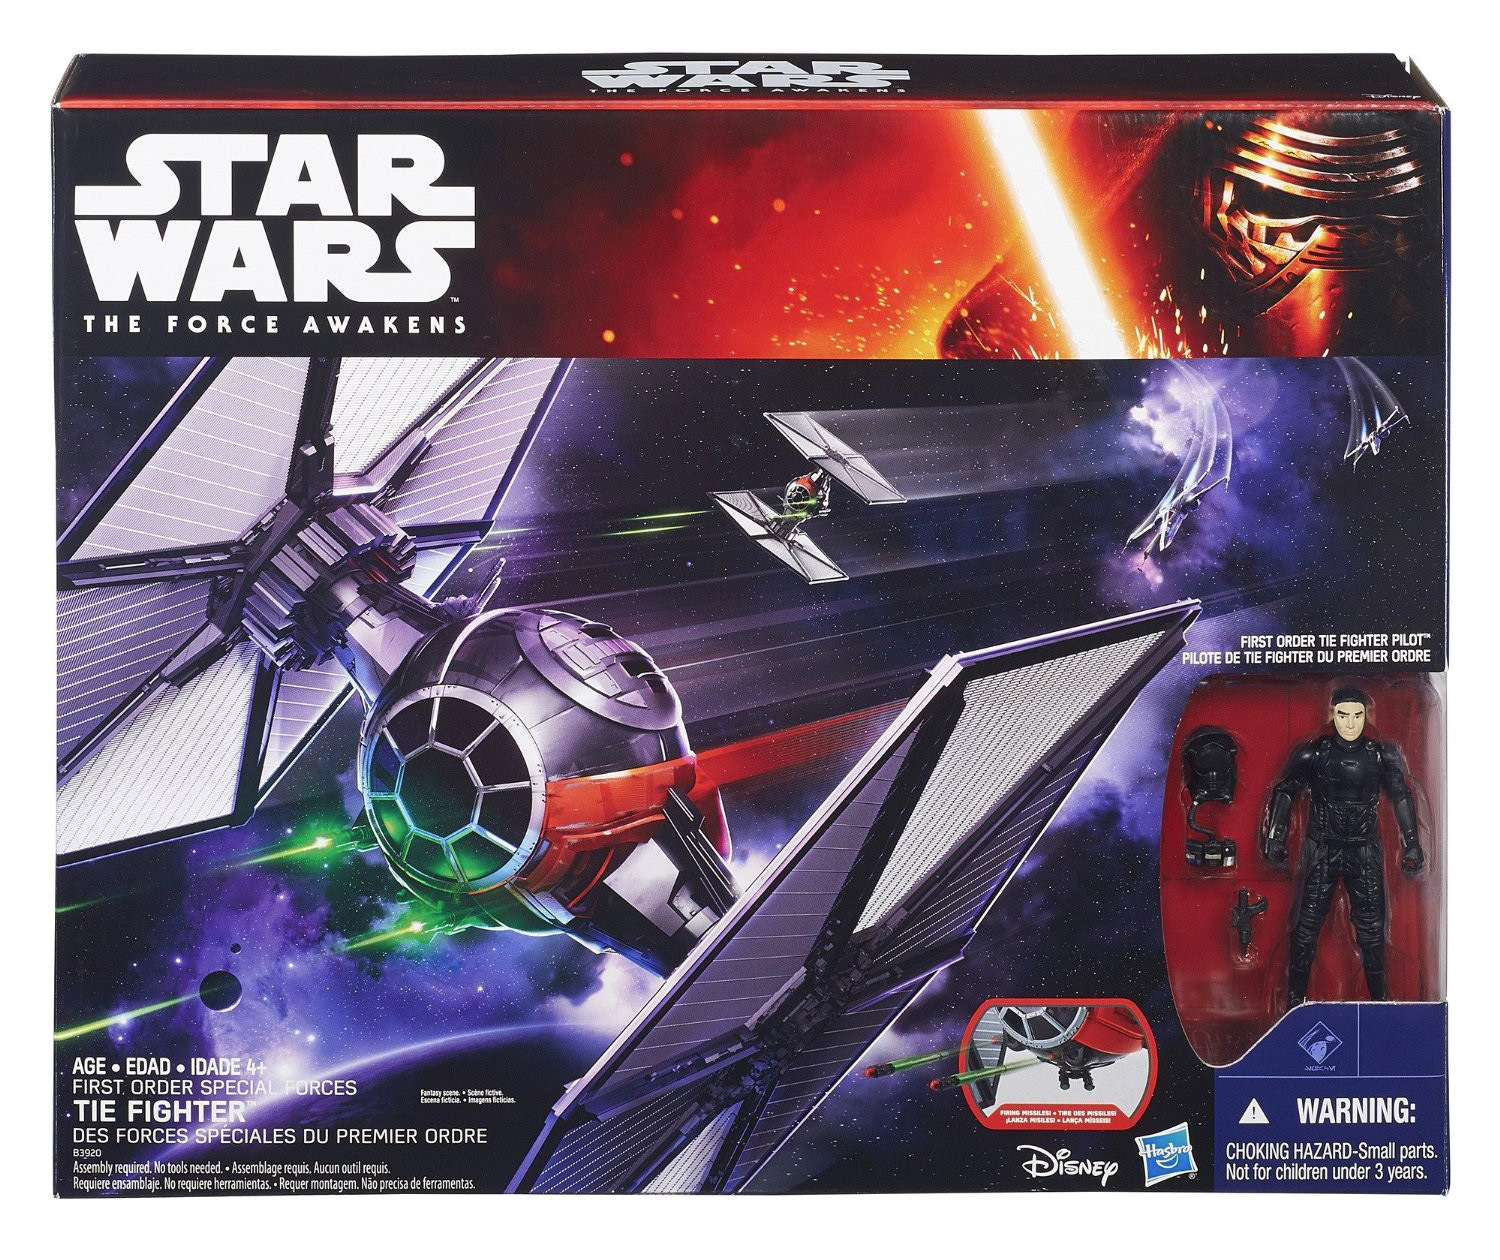 Star Wars: Episode VII - The Force Awakens Class II Deluxe First Order TIE Fighter Vehicle